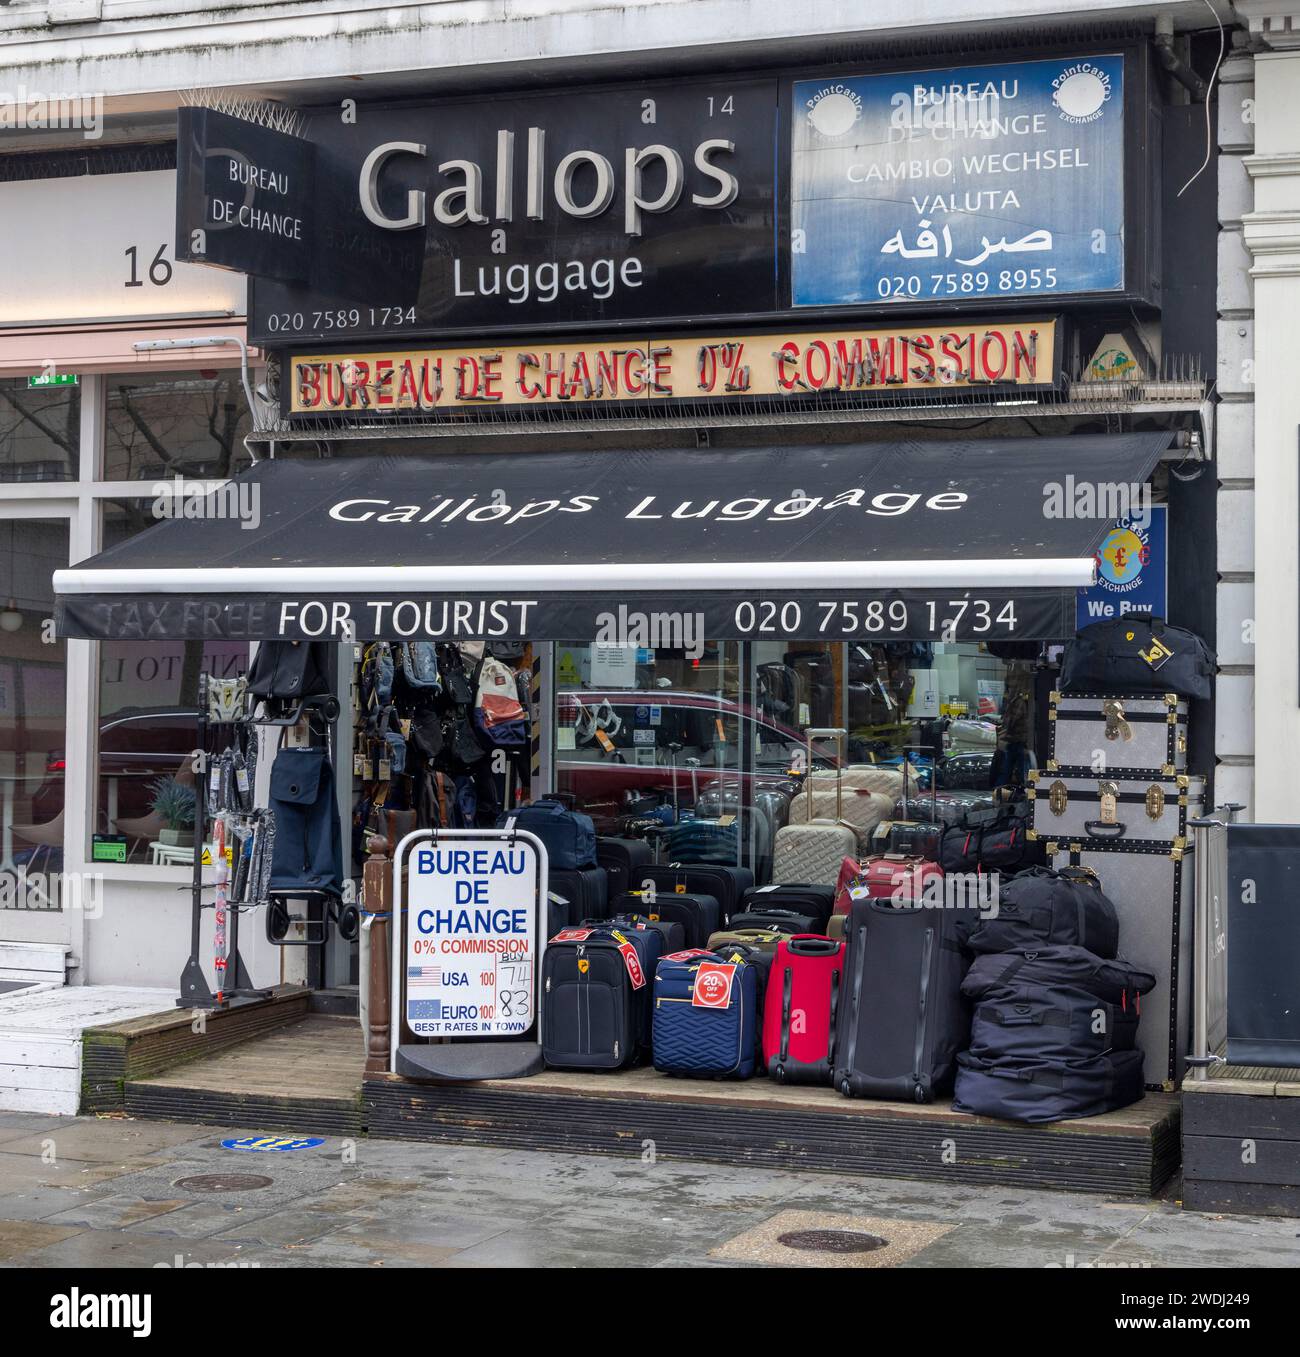 Gallops tourist currency exchange and luggage shop, South Kensington, London UK Stock Photo